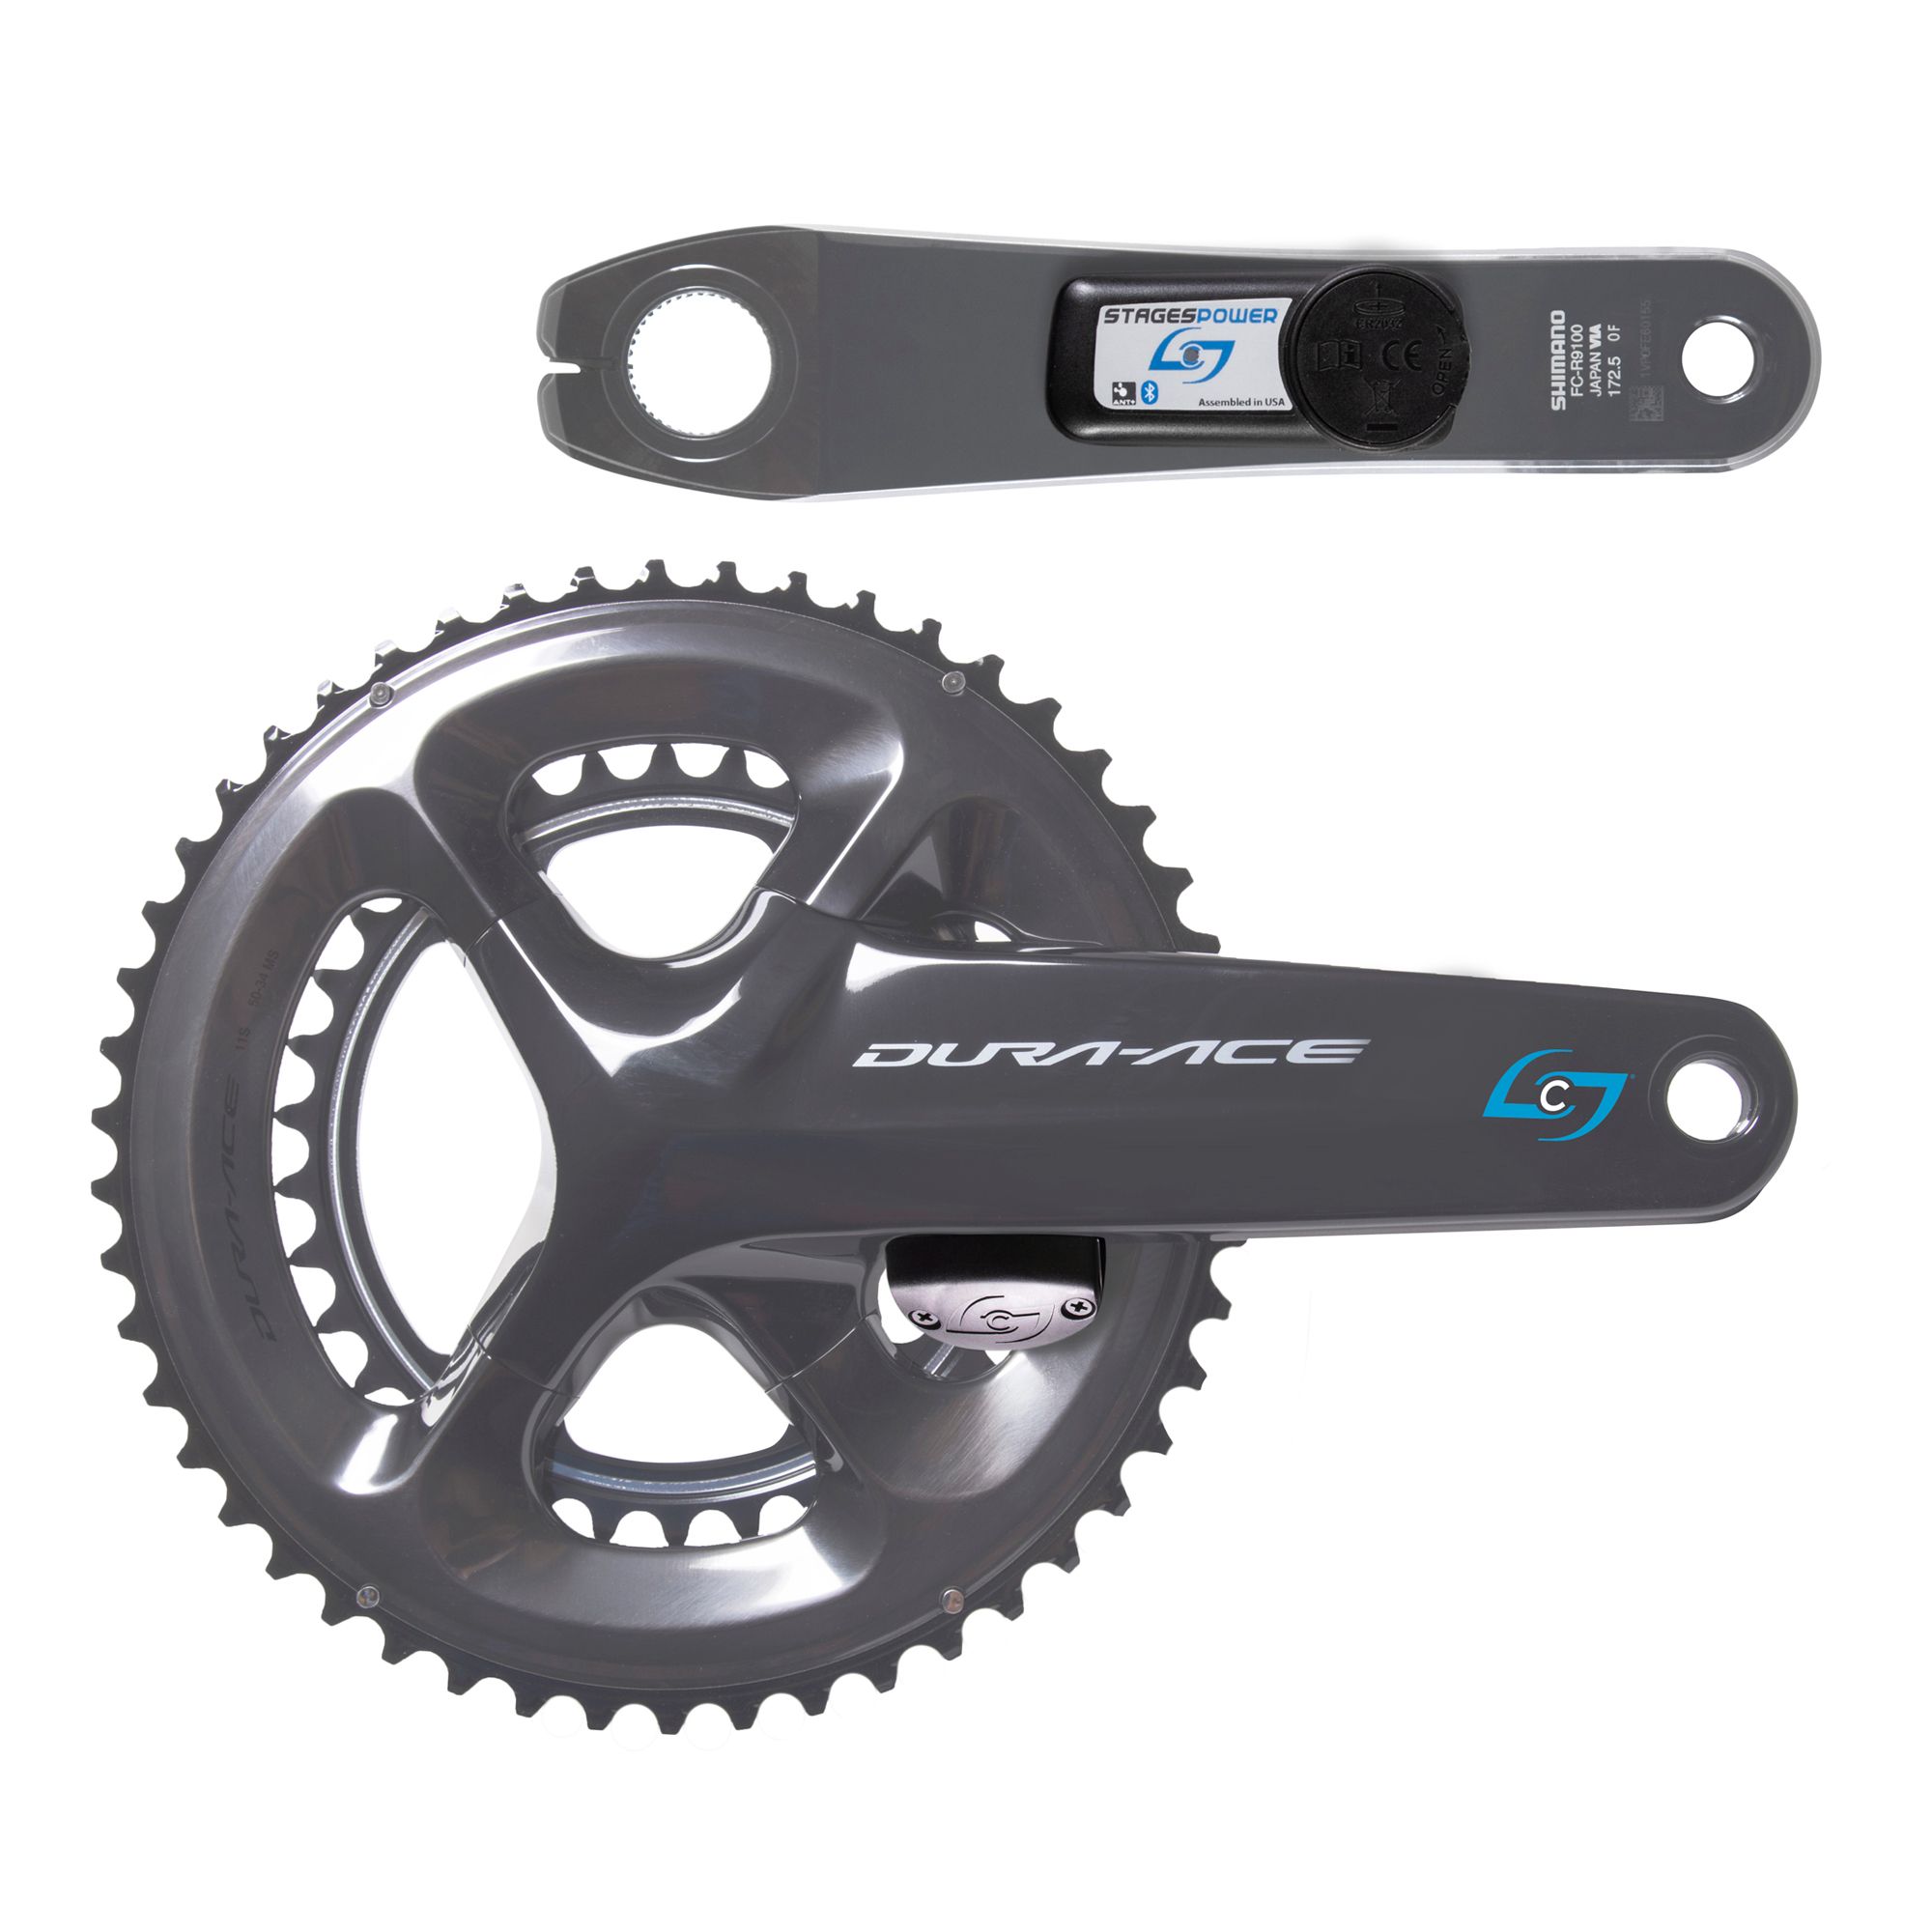 gekruld Kruik reinigen Stages Power LR - Shimano DURA-ACE R9100 POWER METER - Factory Install |  Stages Cycling